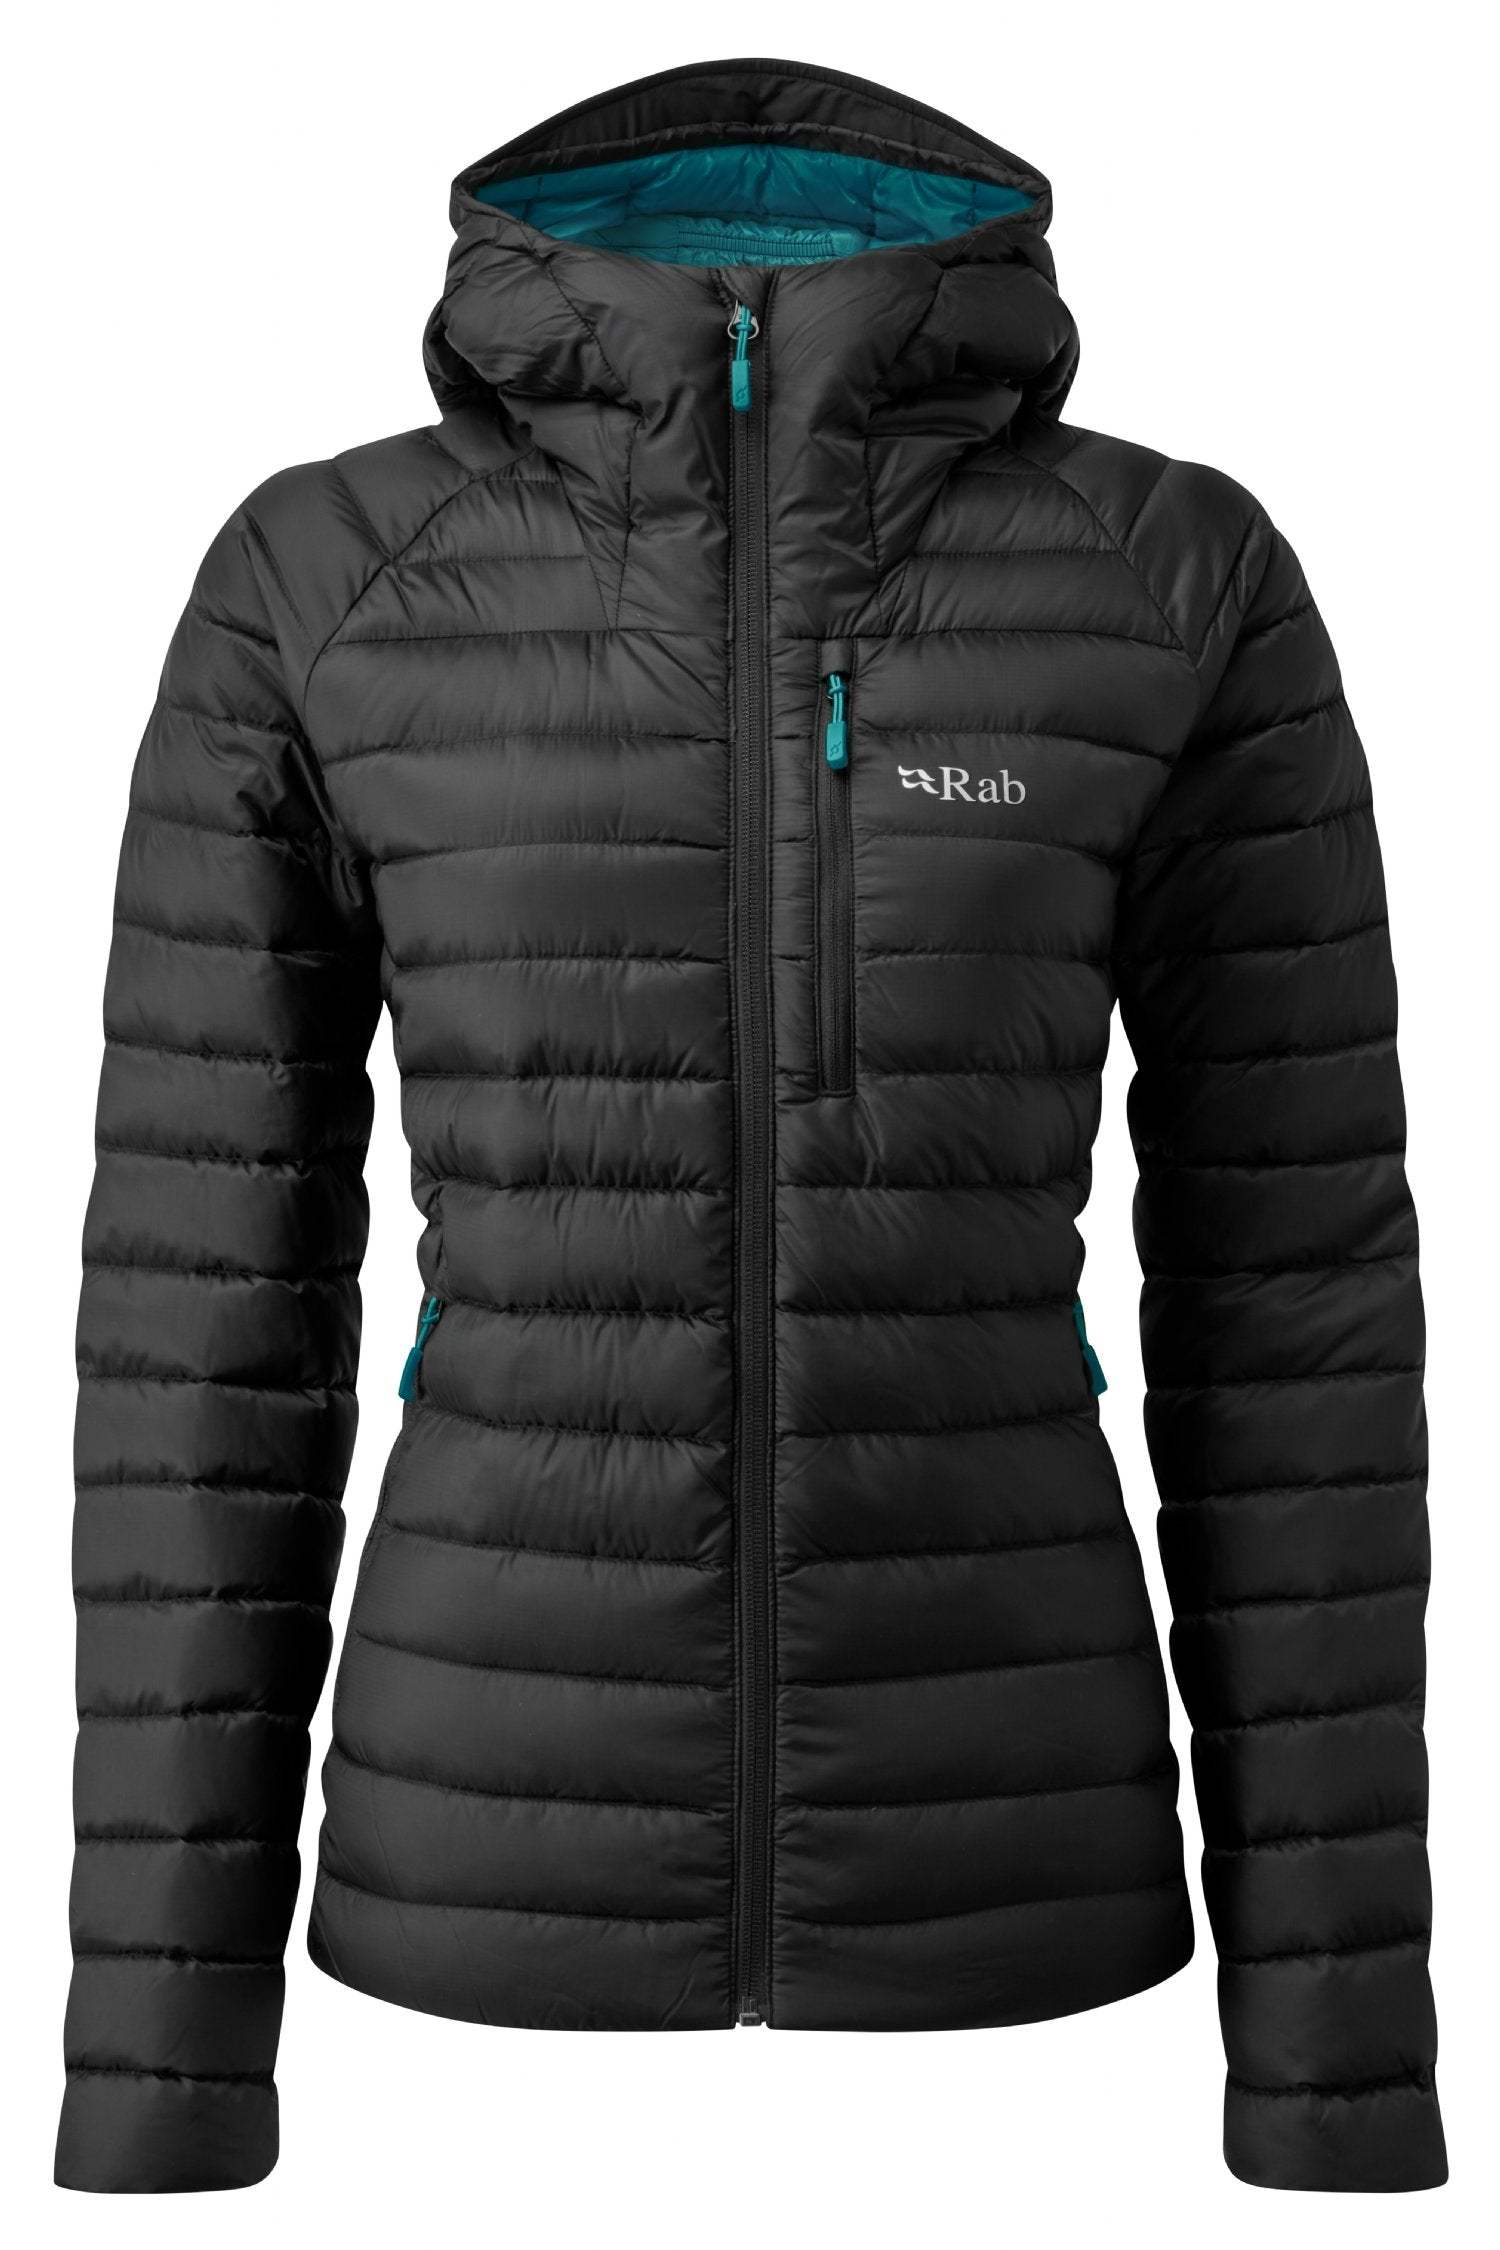 Rab Women's Microlight Alpine Jacket - The Luxury Promotional Gifts Company Limited